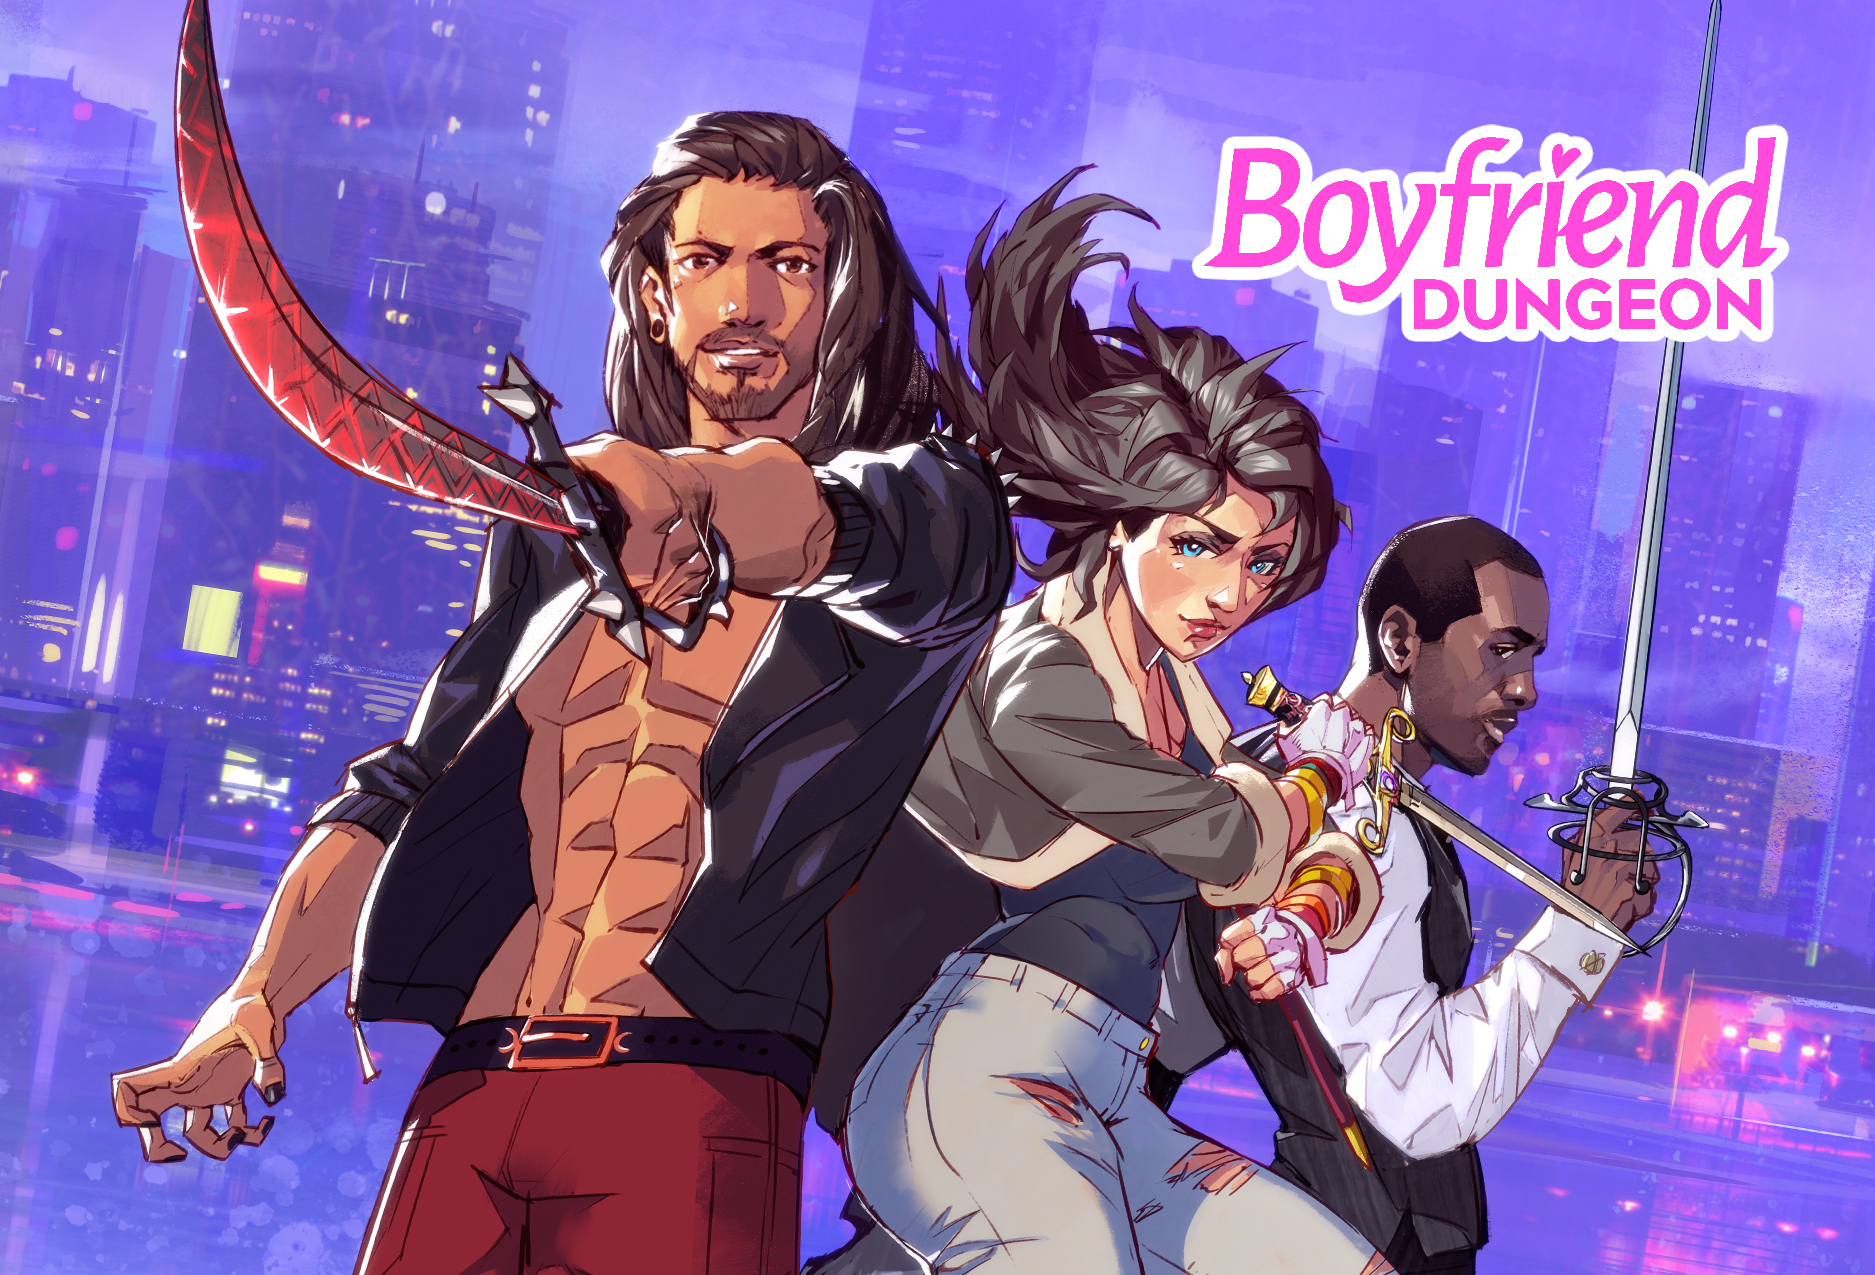 The key art for Boyfriend Dungeon featuring the game's logo and three dateable weapons.